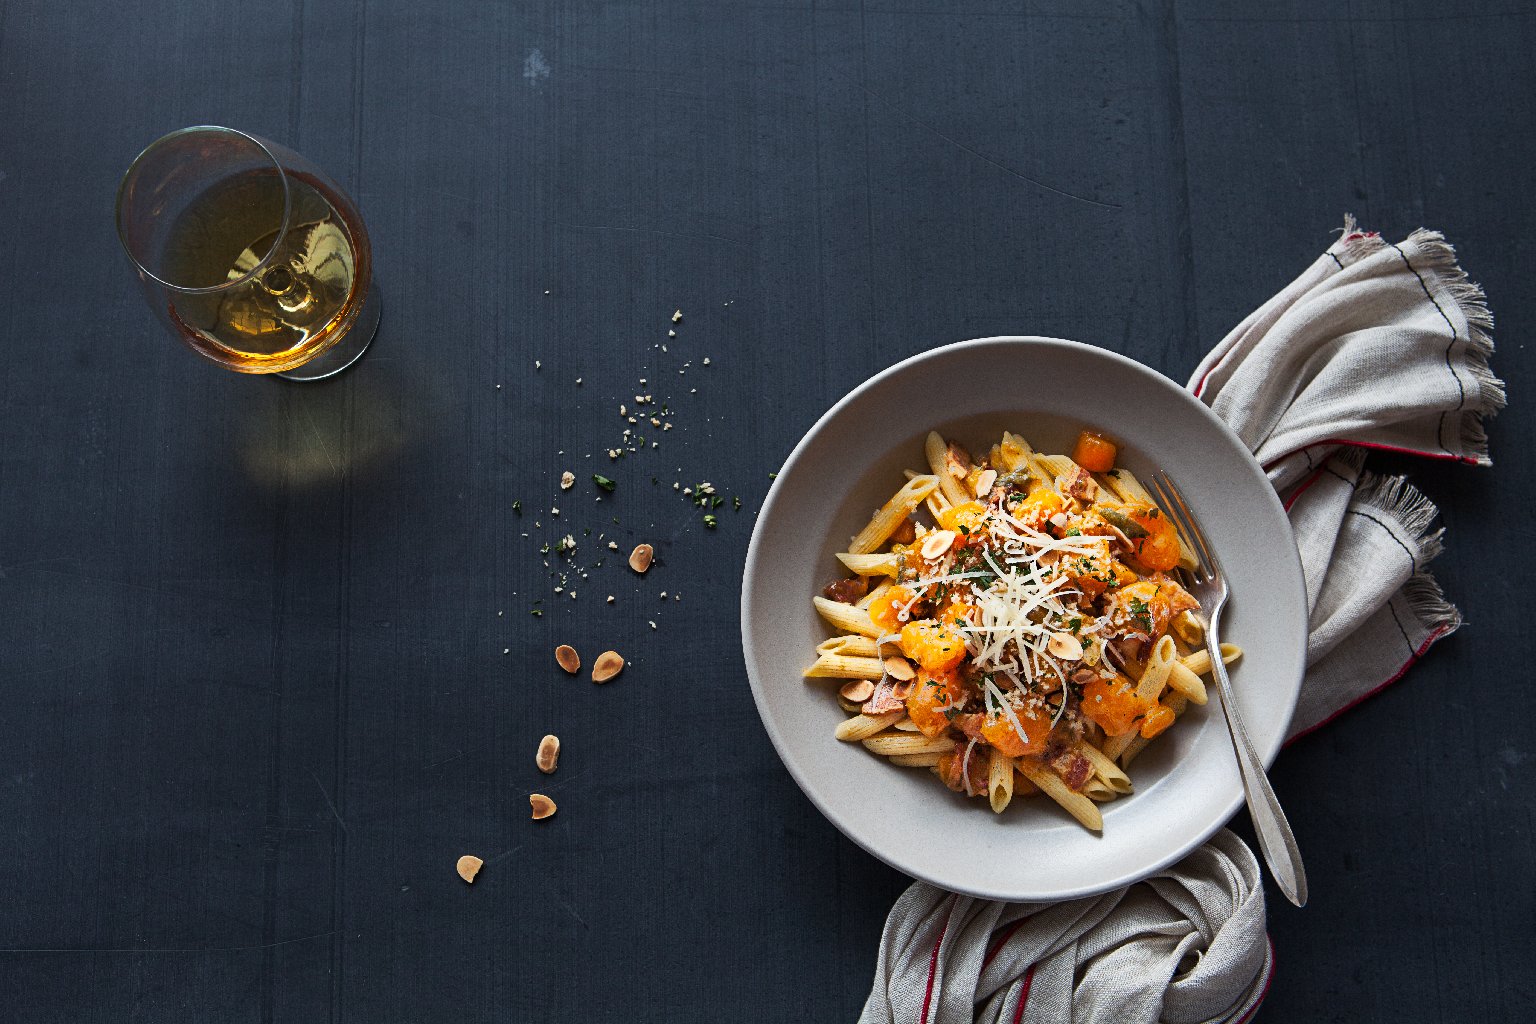 A meal prepared from Munchery. Photo: Munchery